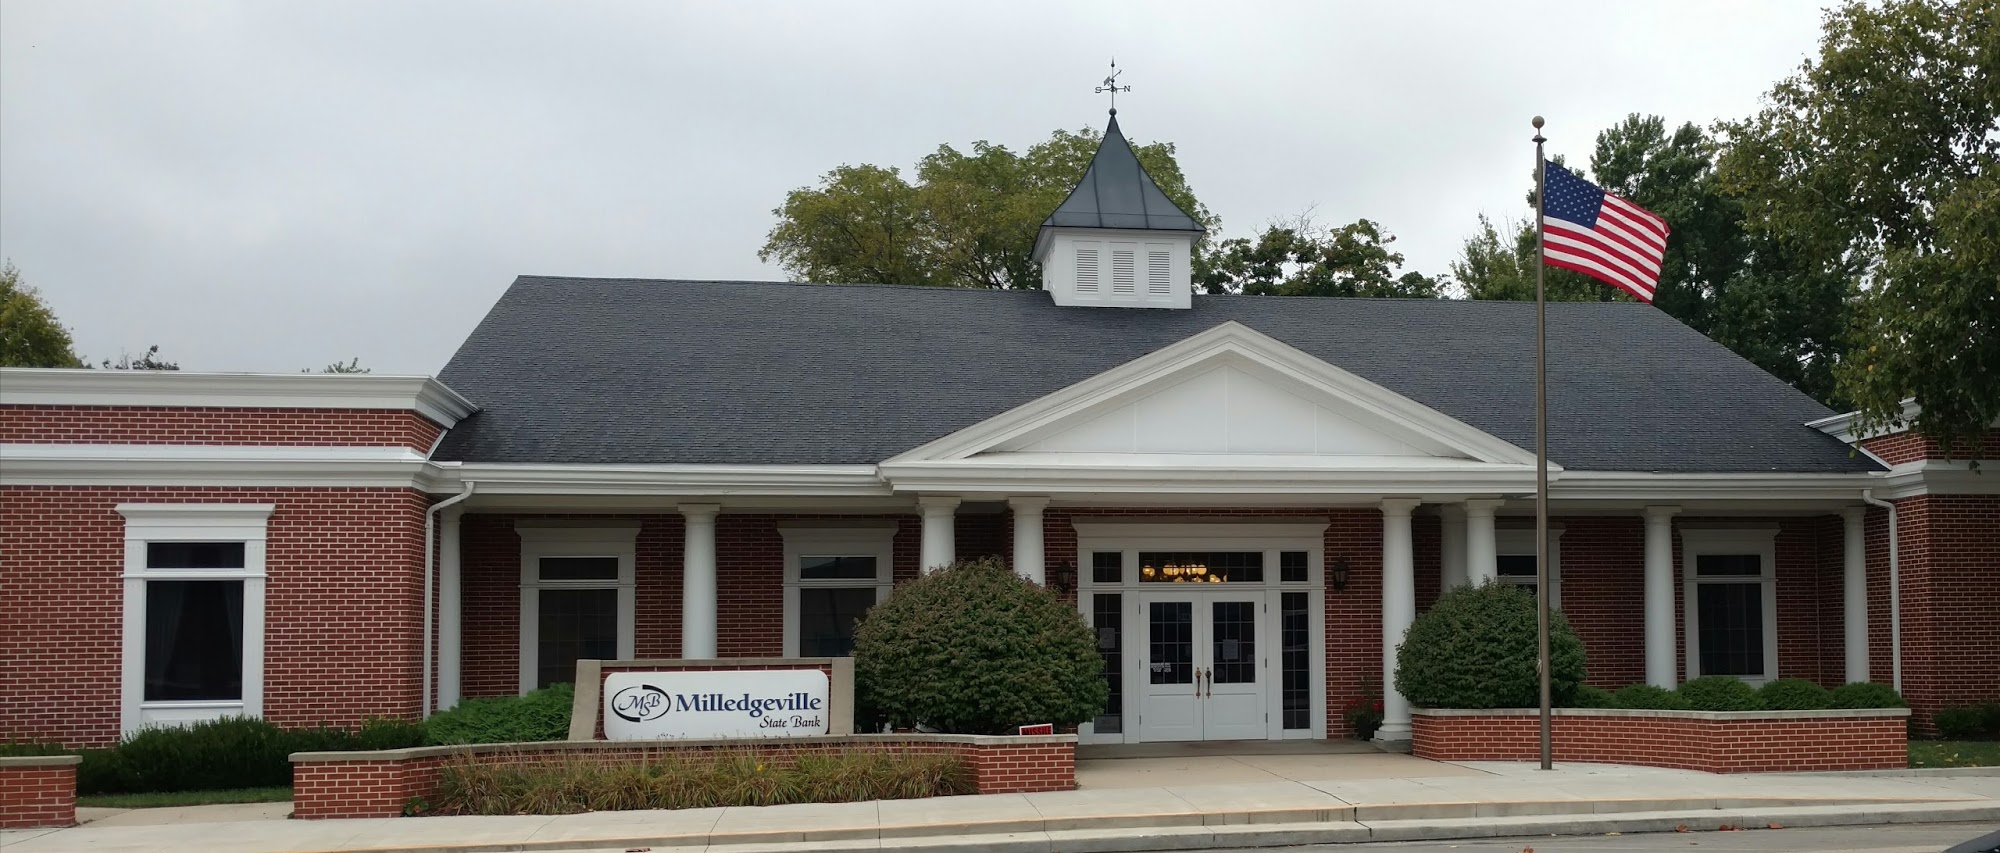 Milledgeville State Bank